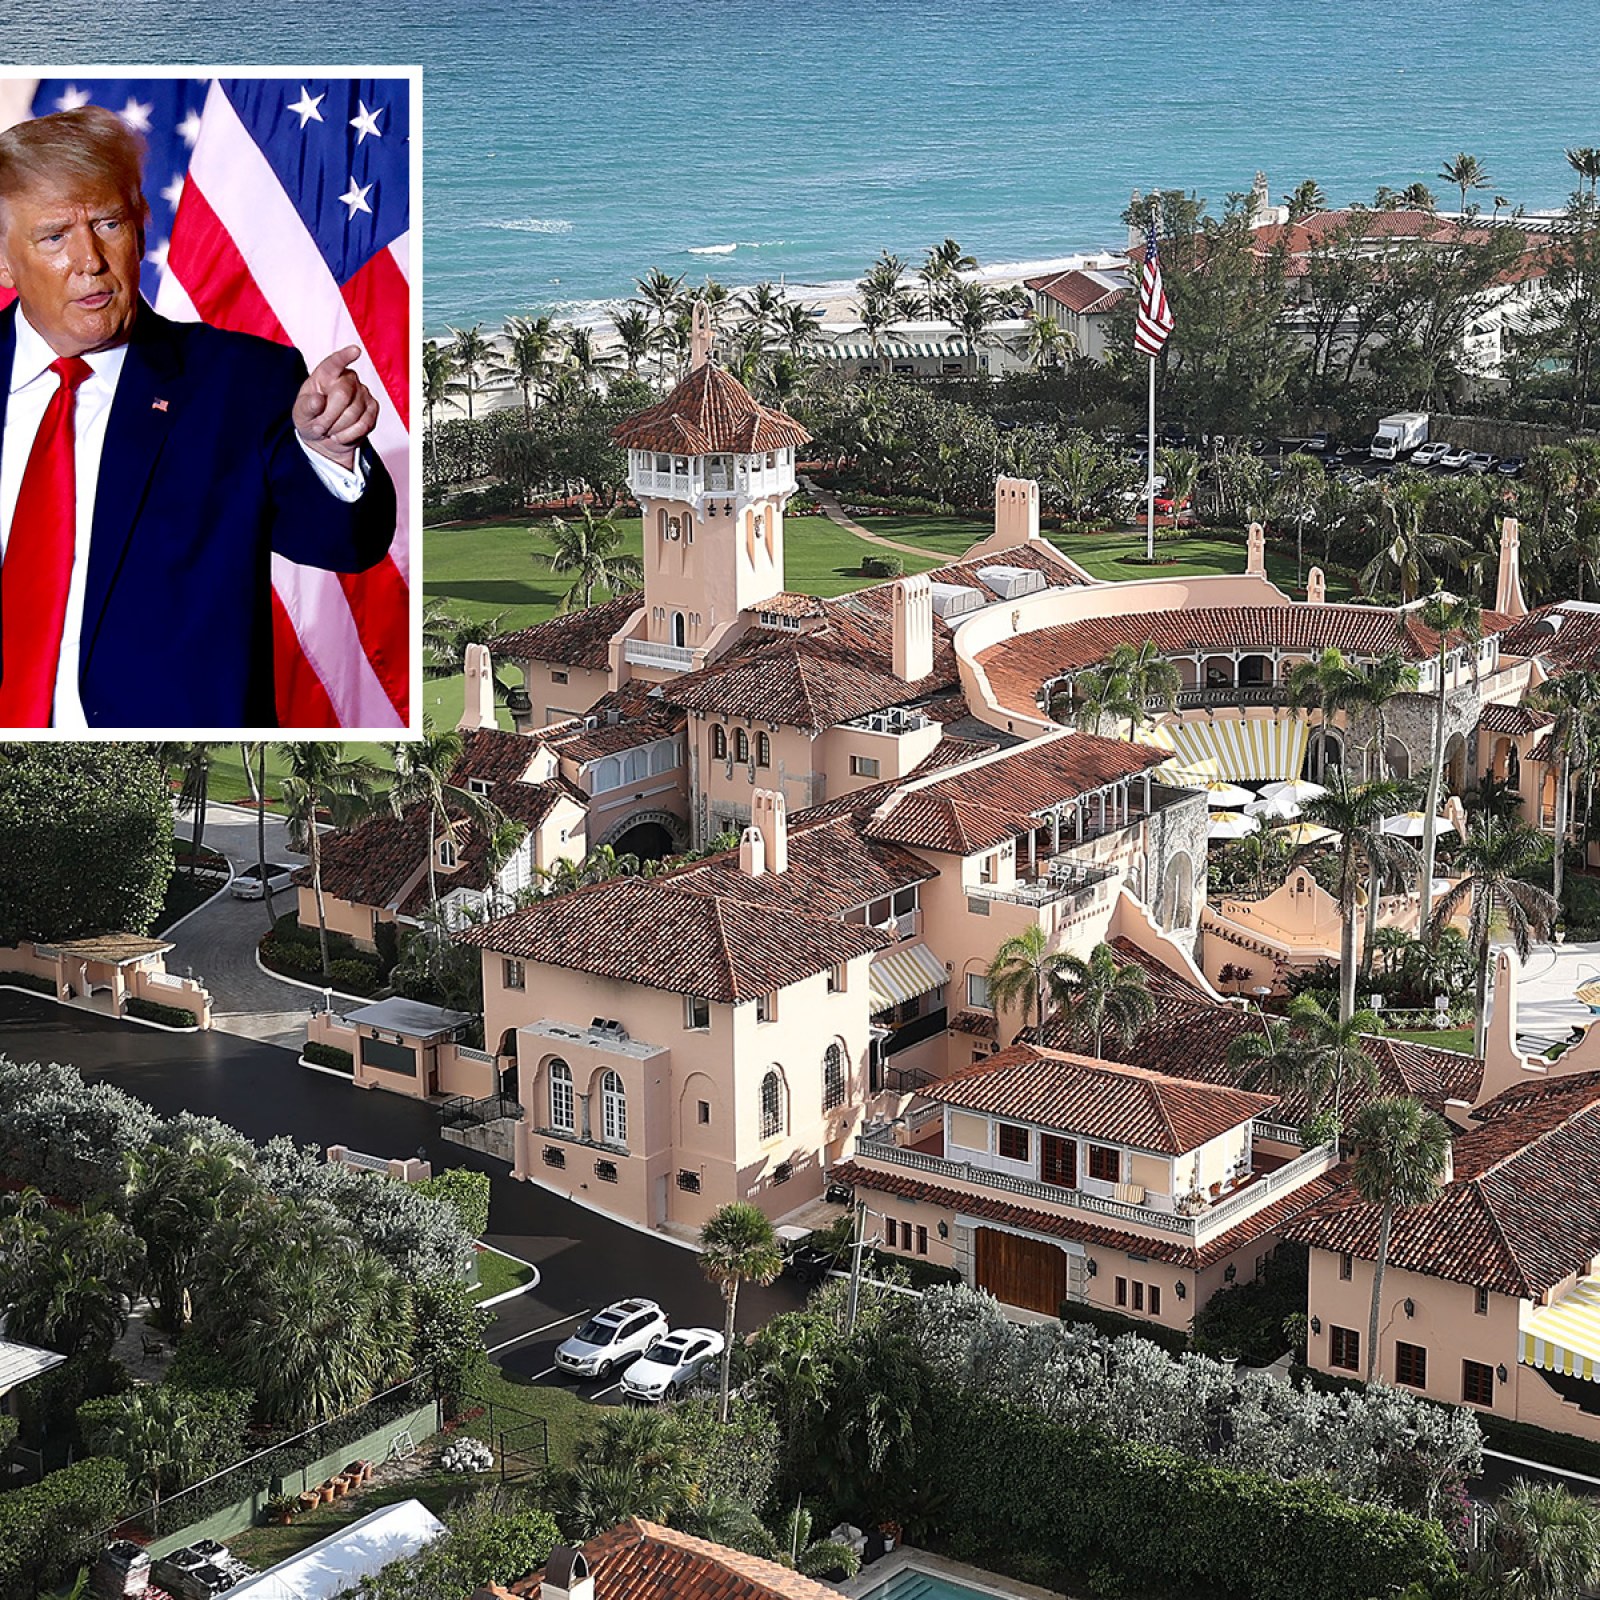 Trumps Cut Price on Florida Rental That Includes Access to Mar-a